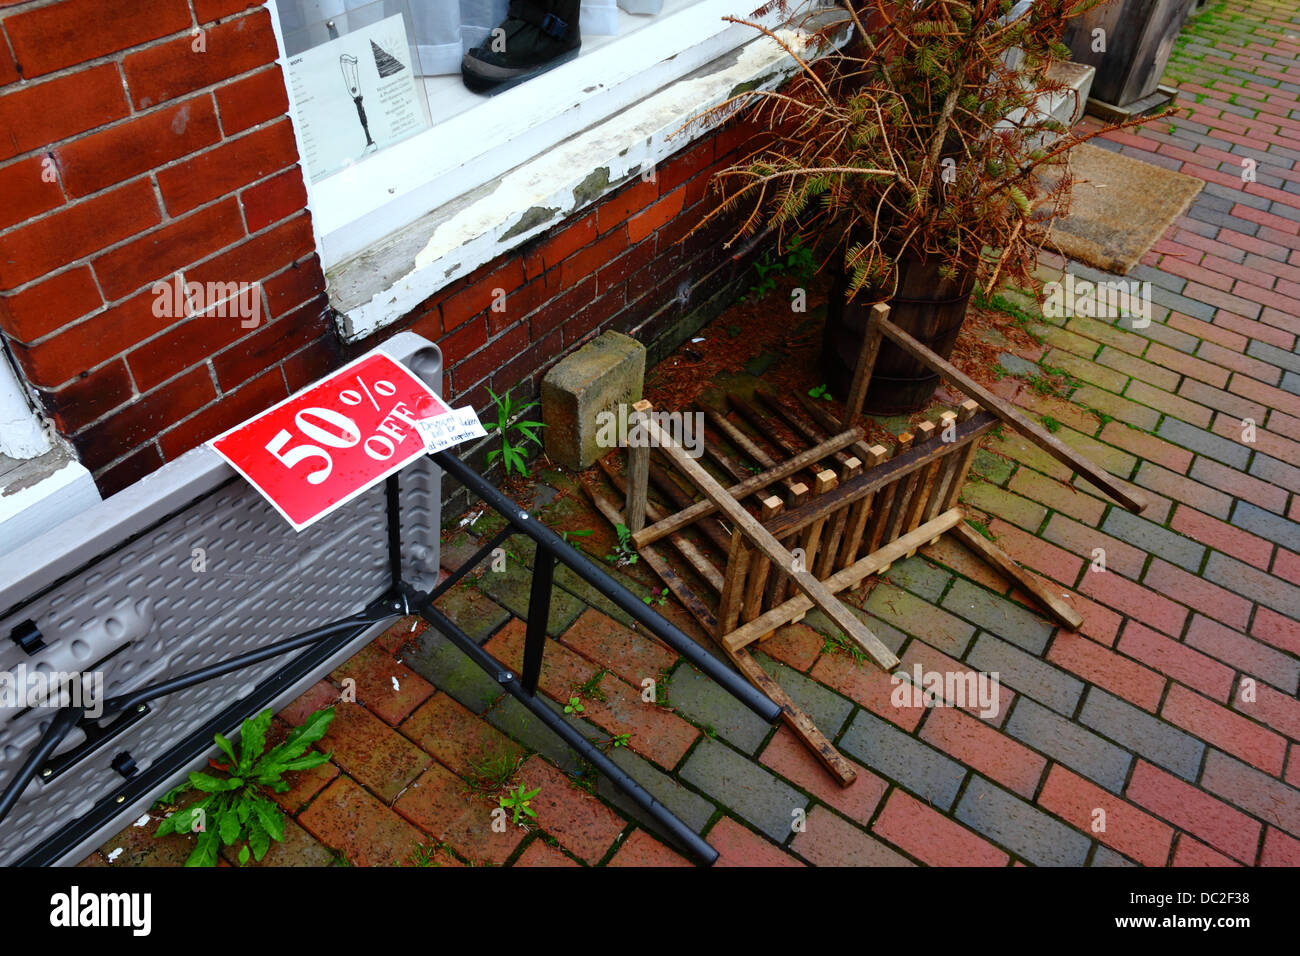 Sign offering 50% off outside junk shop, Oakland, Garrett County, Maryland, United States of America Stock Photo